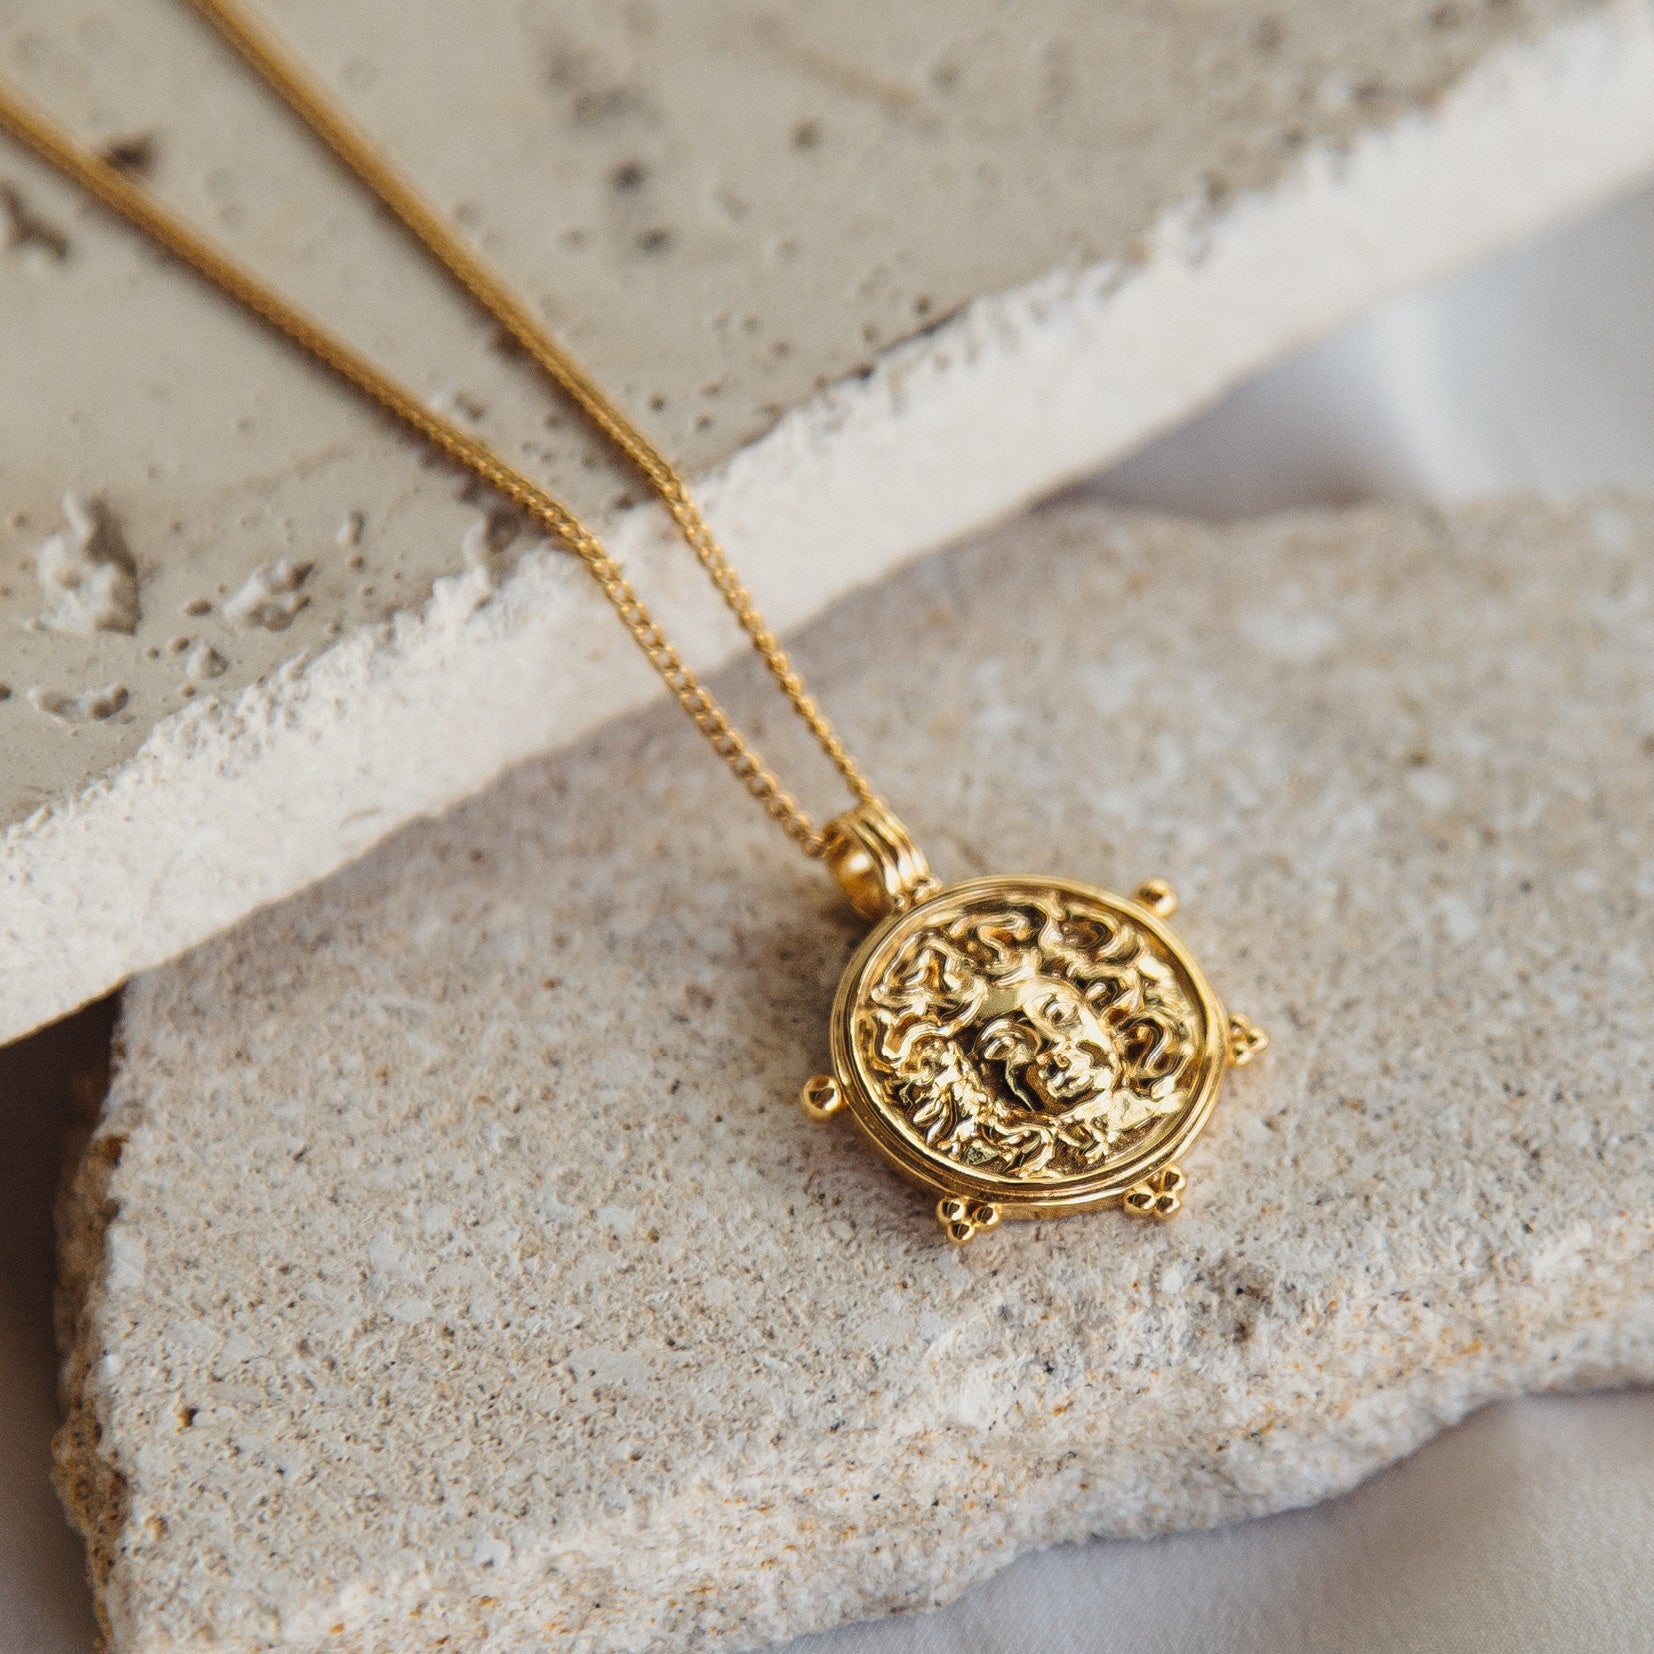 Medusa Pendant for Protection - Necklace Gold